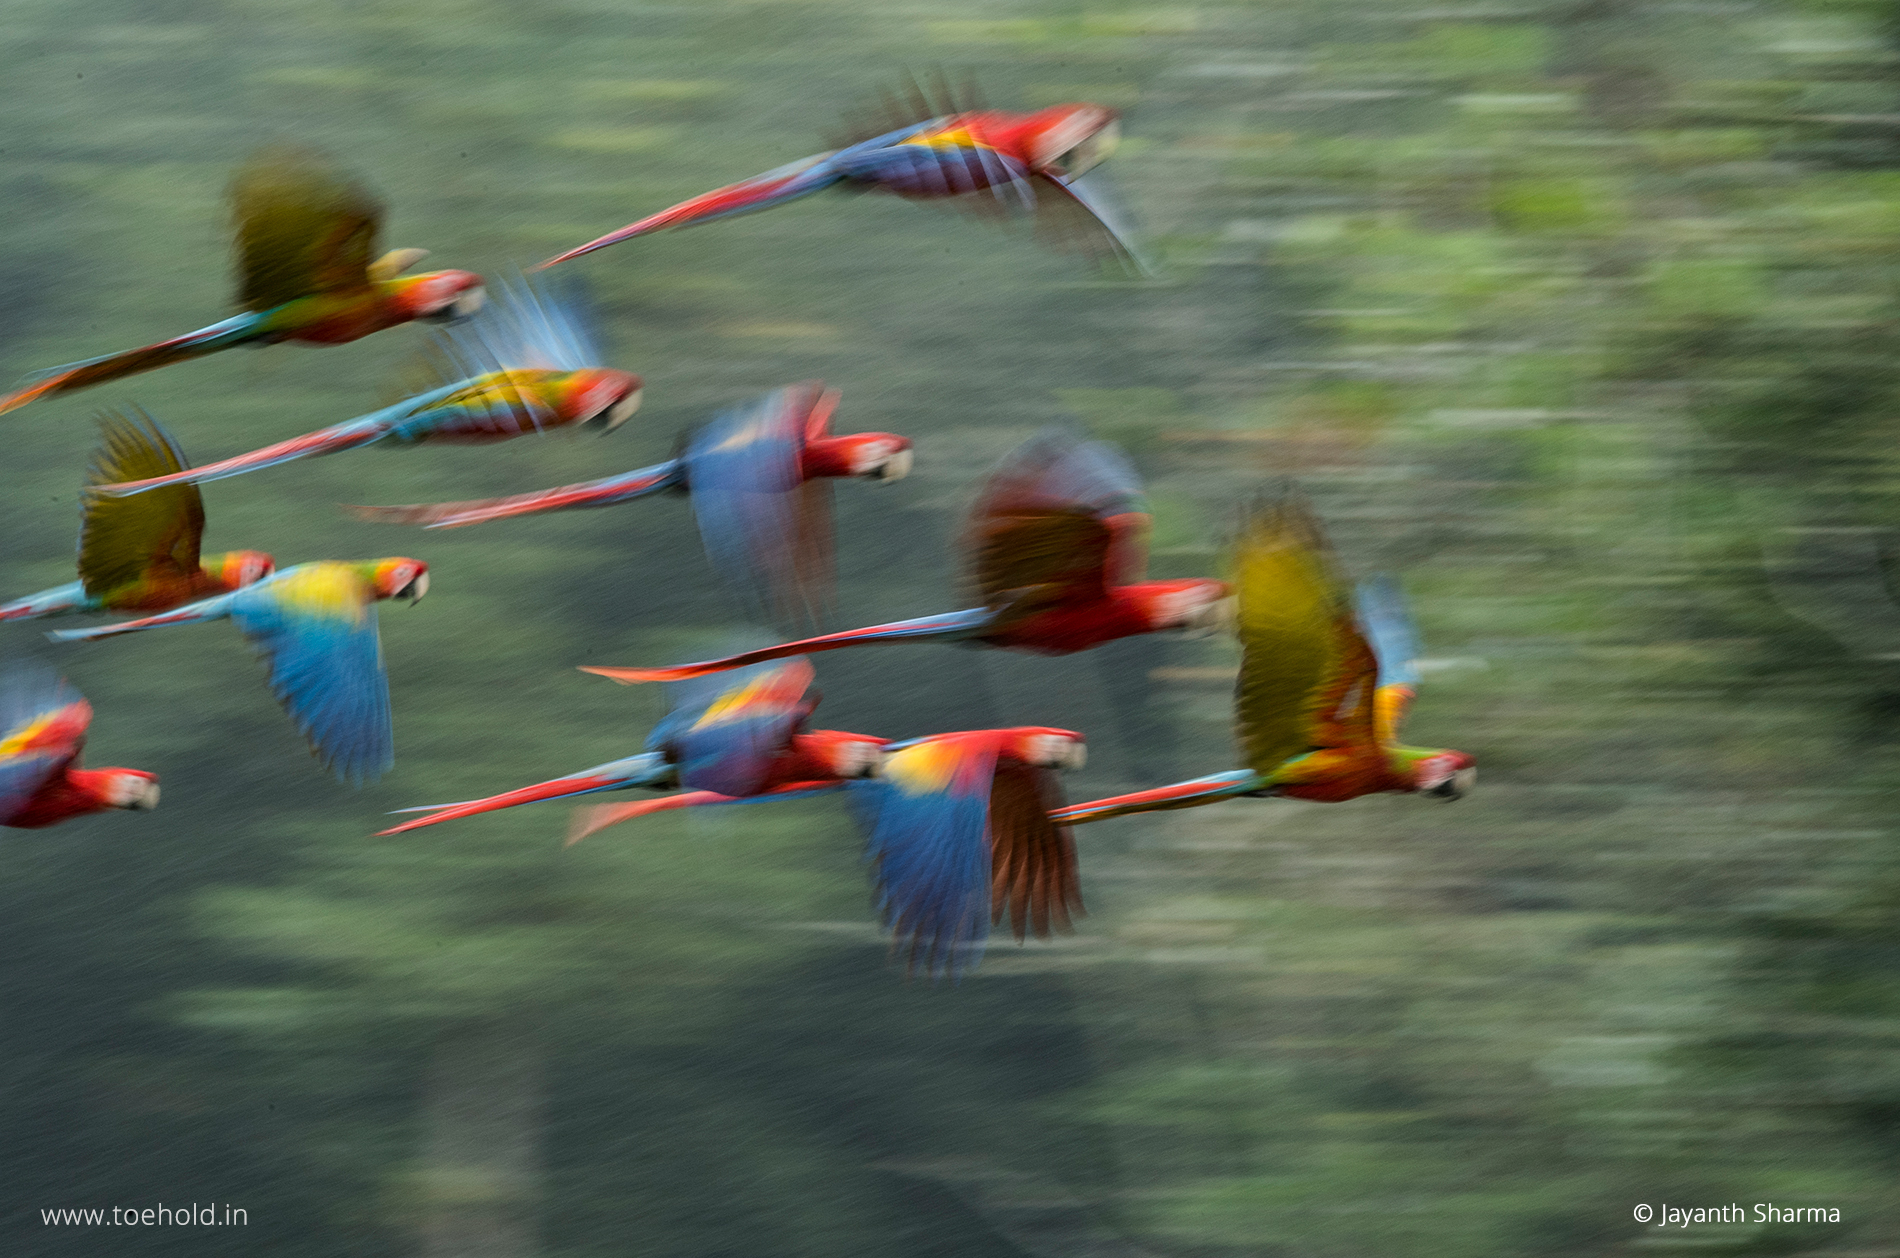 grp scarlet macaw panning costa rica 2022